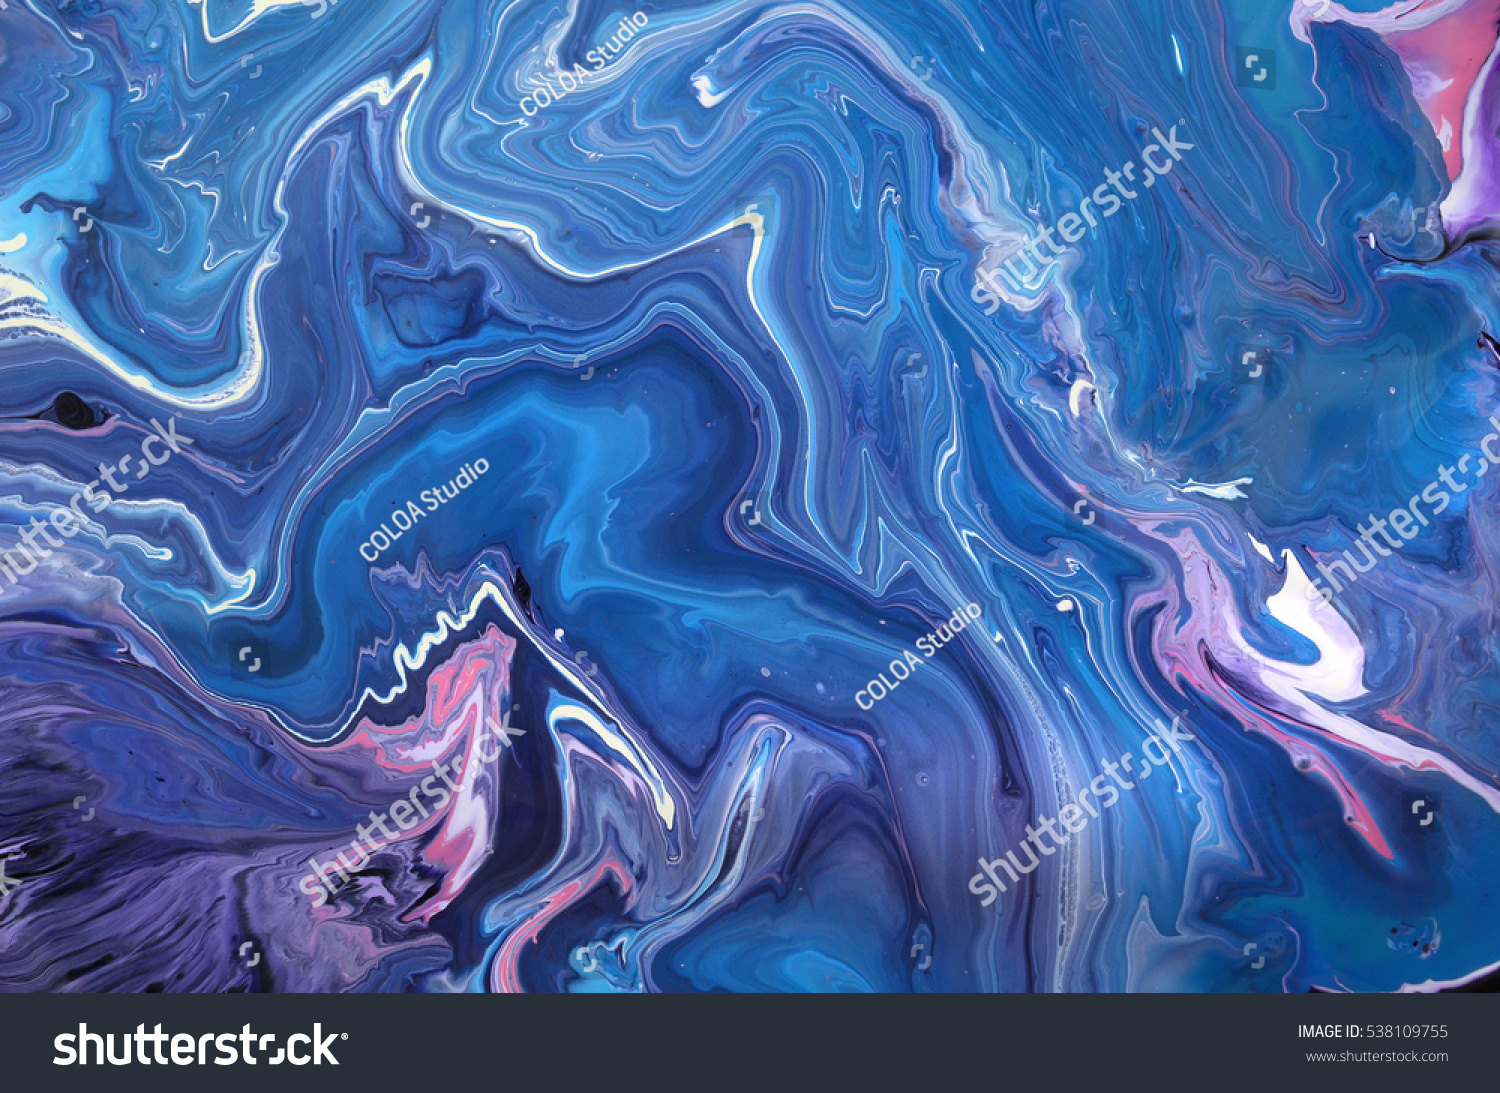 Blue and violet colours. Liquid paints on wet paper. Beautiful grunge texture for card, poster, invitation. Unusual abstract illustration. Horizontal image. Marble background. #538109755